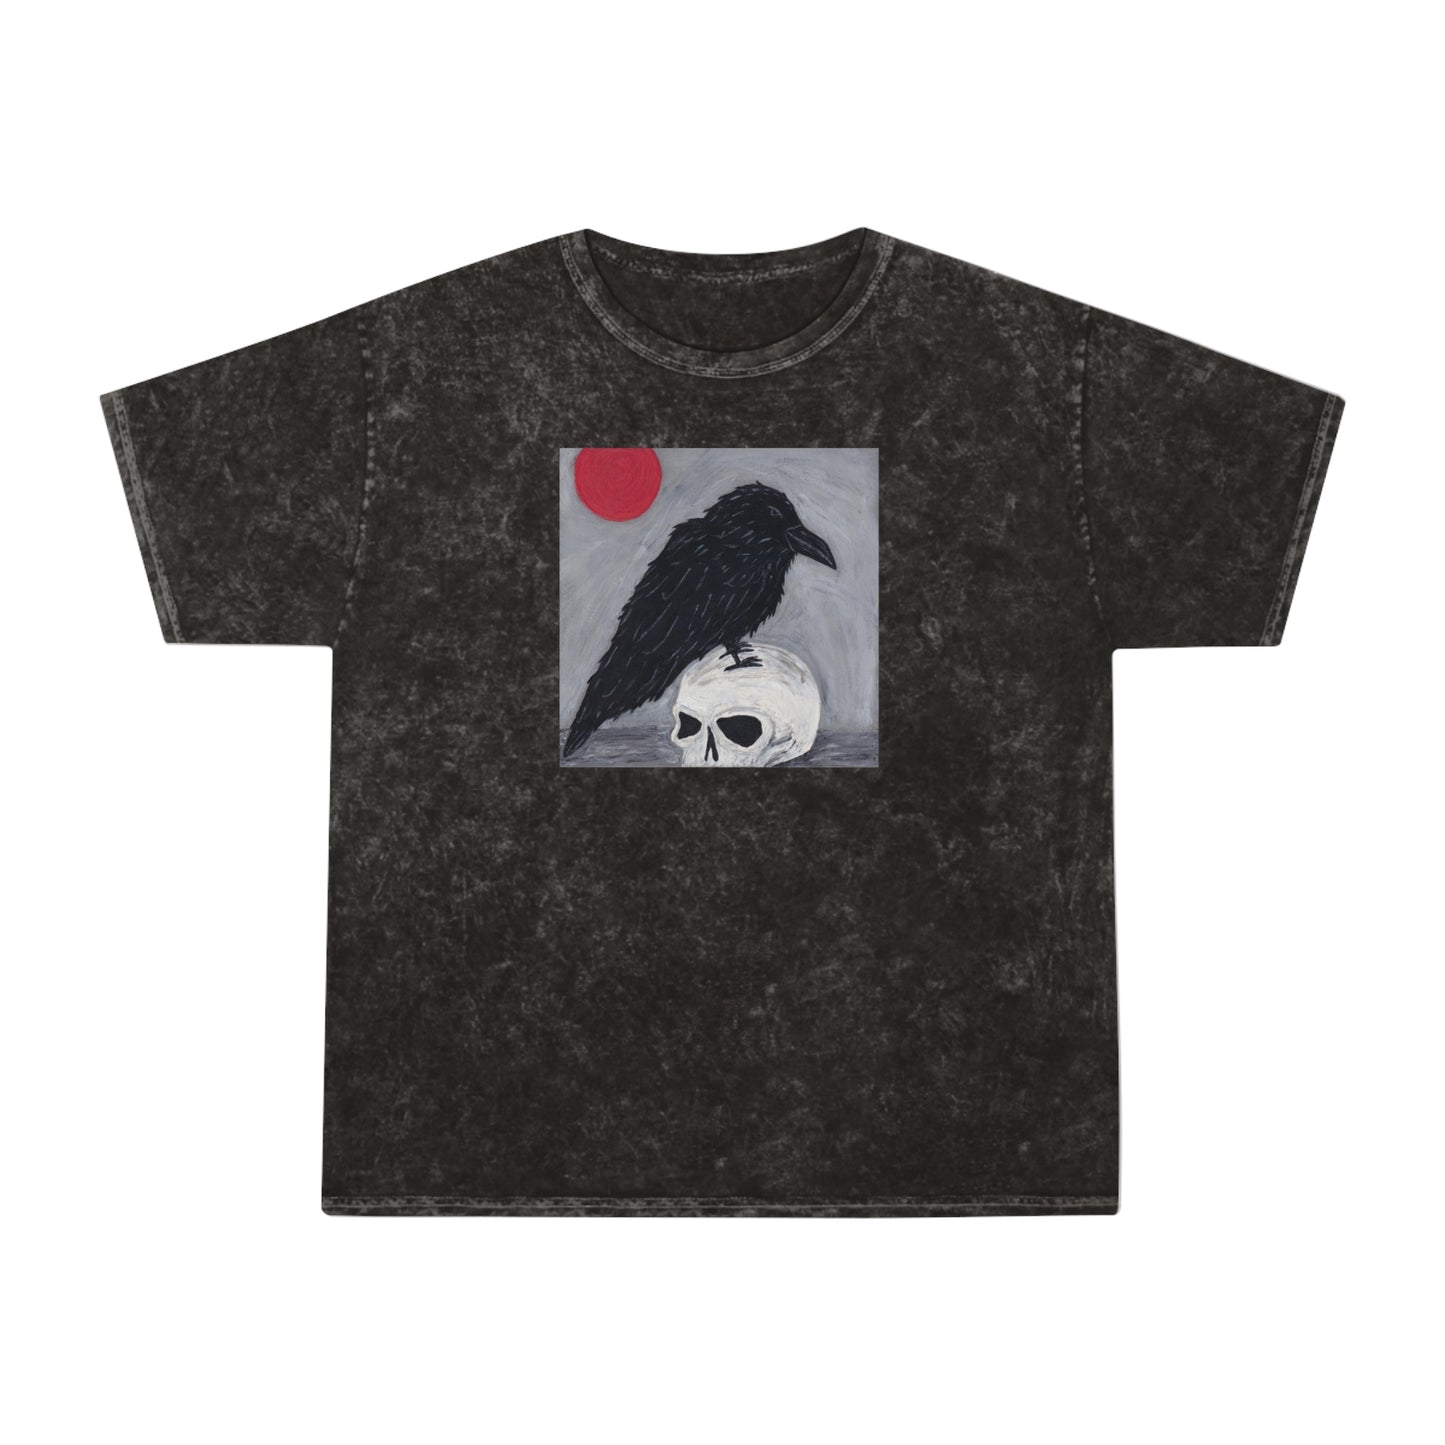 Raven Perched on Skull - Unisex Mineral Wash T-Shirt